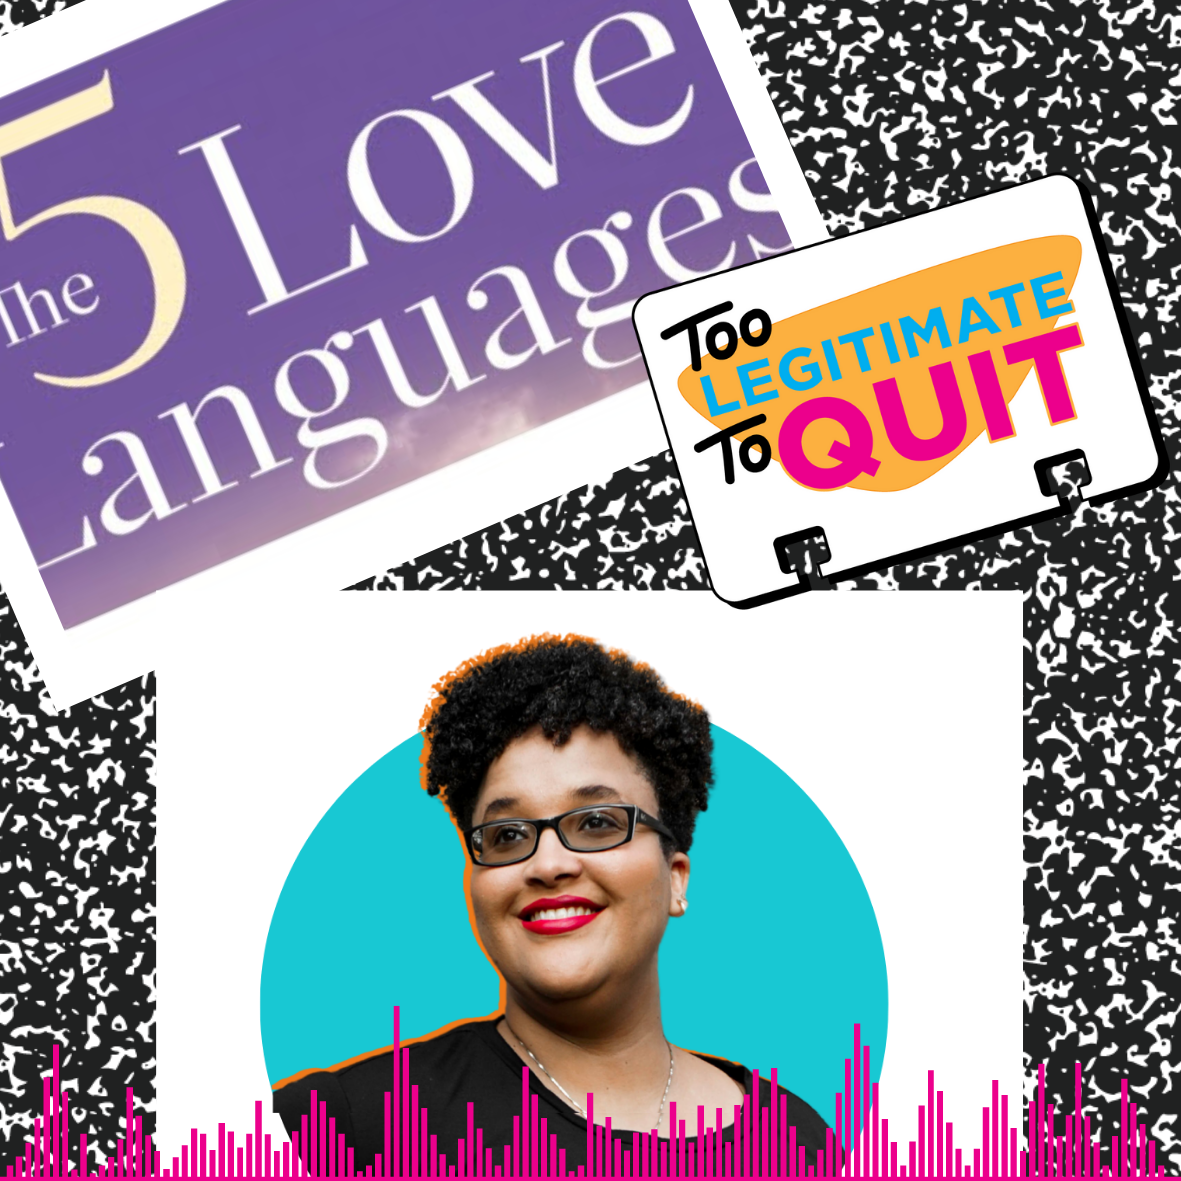 31: On Customers, Compatibility & The 5 Love Languages (feat. Anika Repole Wilson)